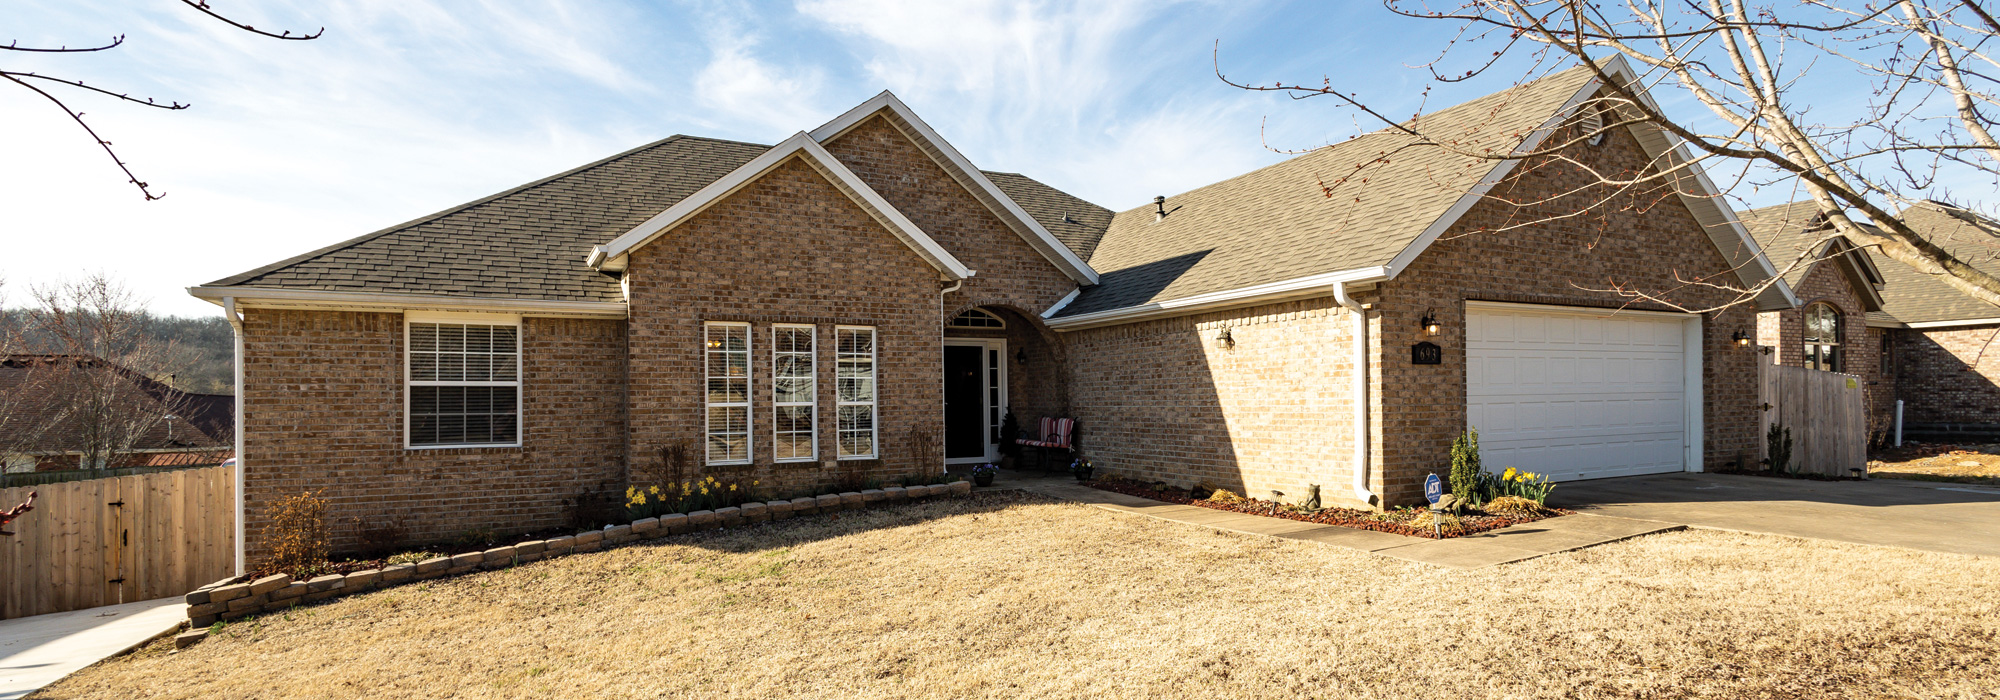 693 West Foothills Drive, Fayetteville, AR